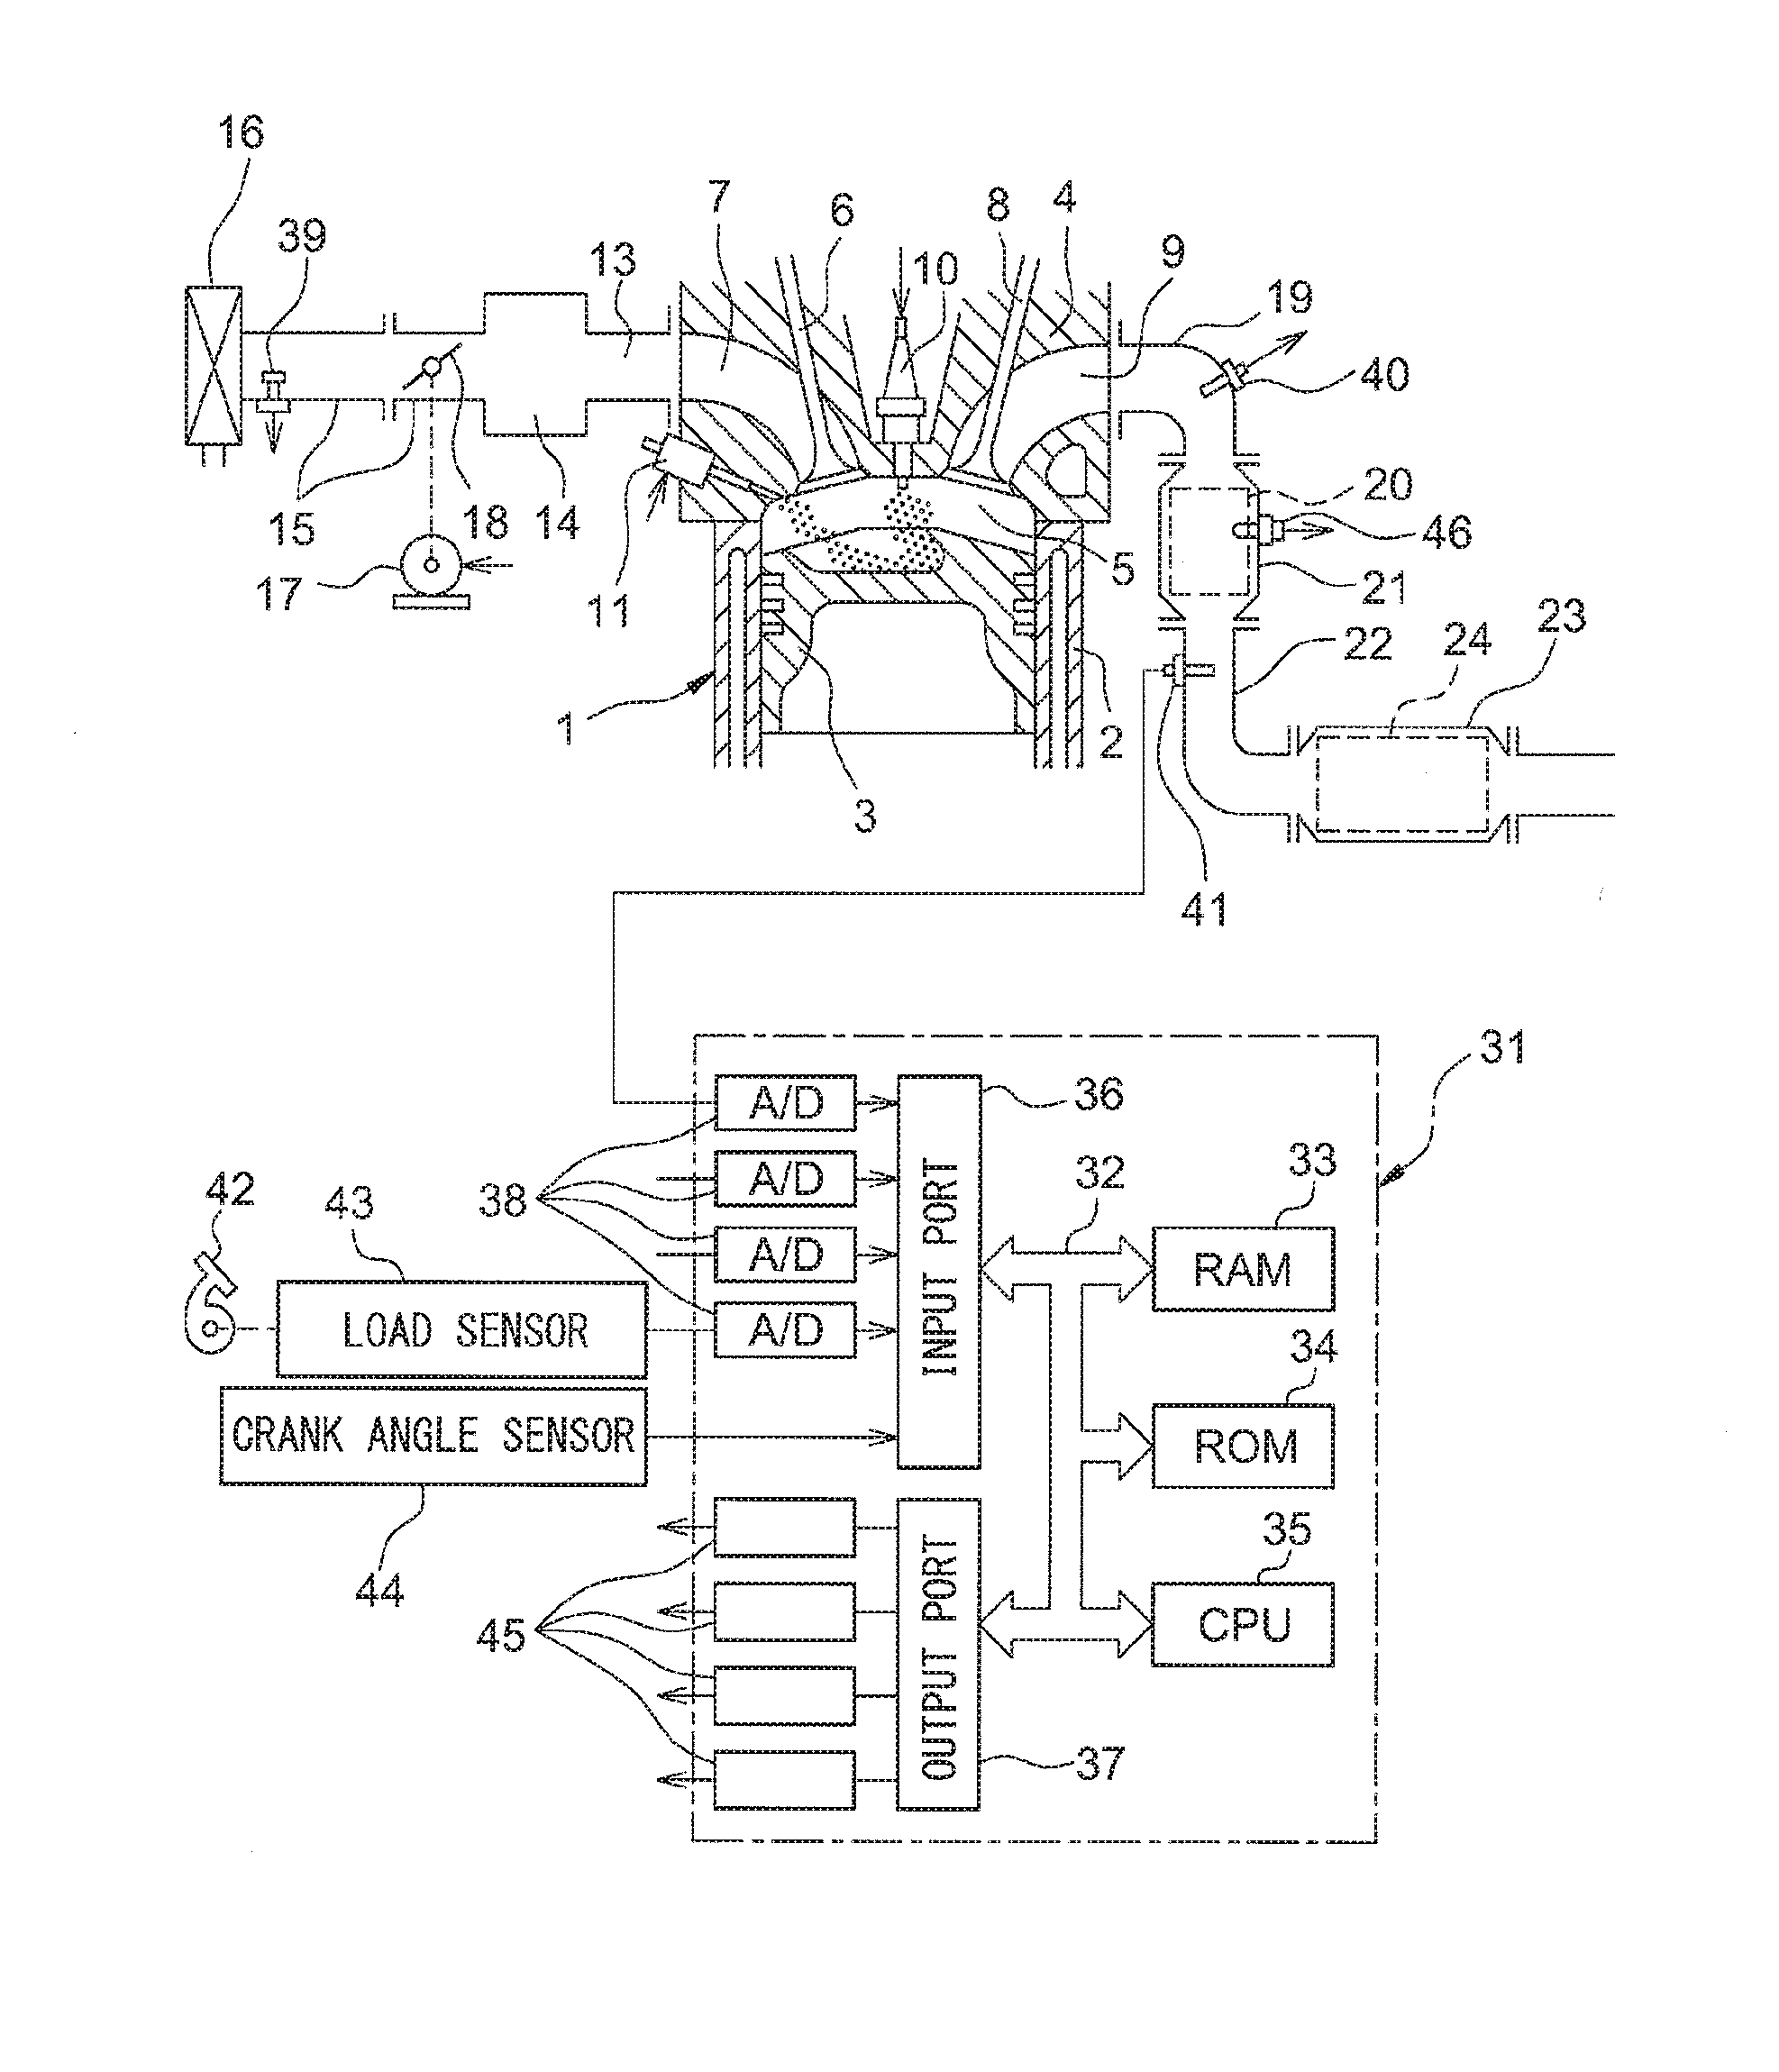 Exhaust purification system of internal combustion engine